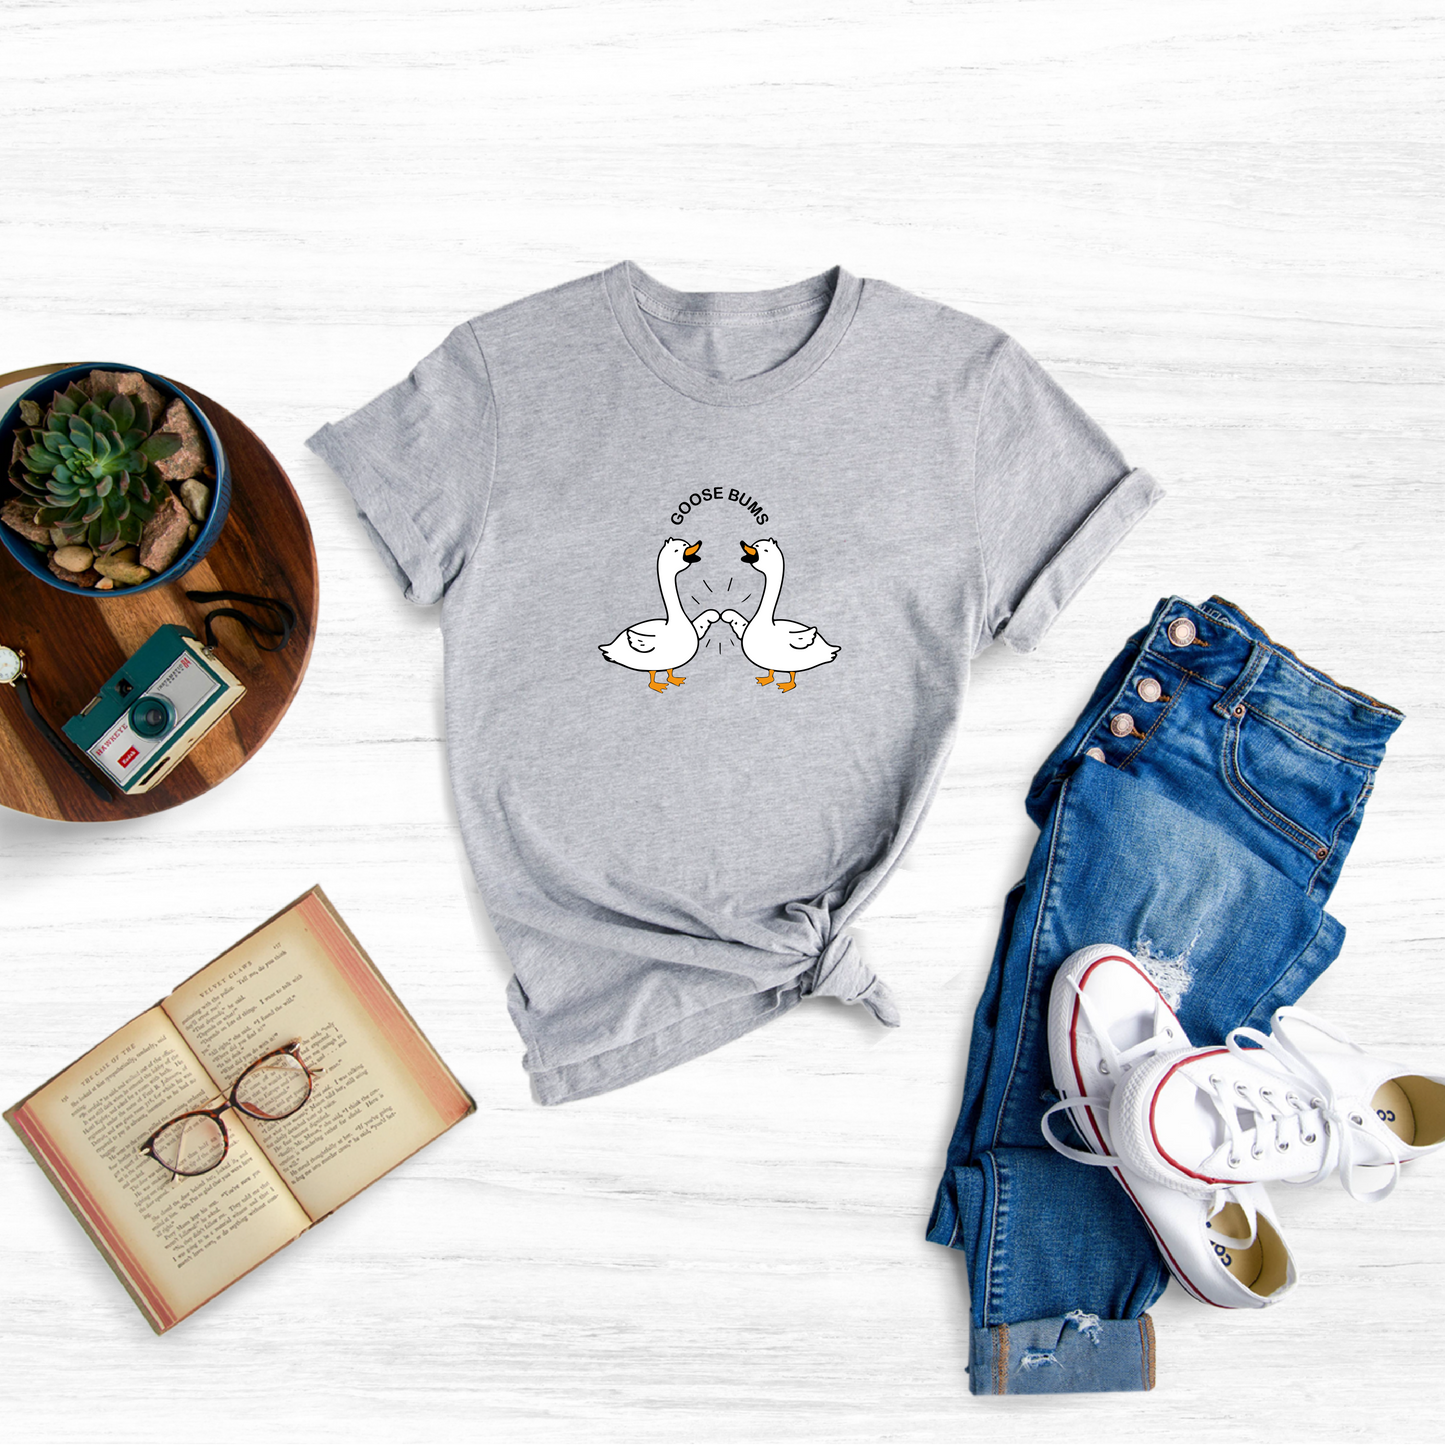 Celebrate the beauty and symbolism of geese with this charming embroidered goose tee.